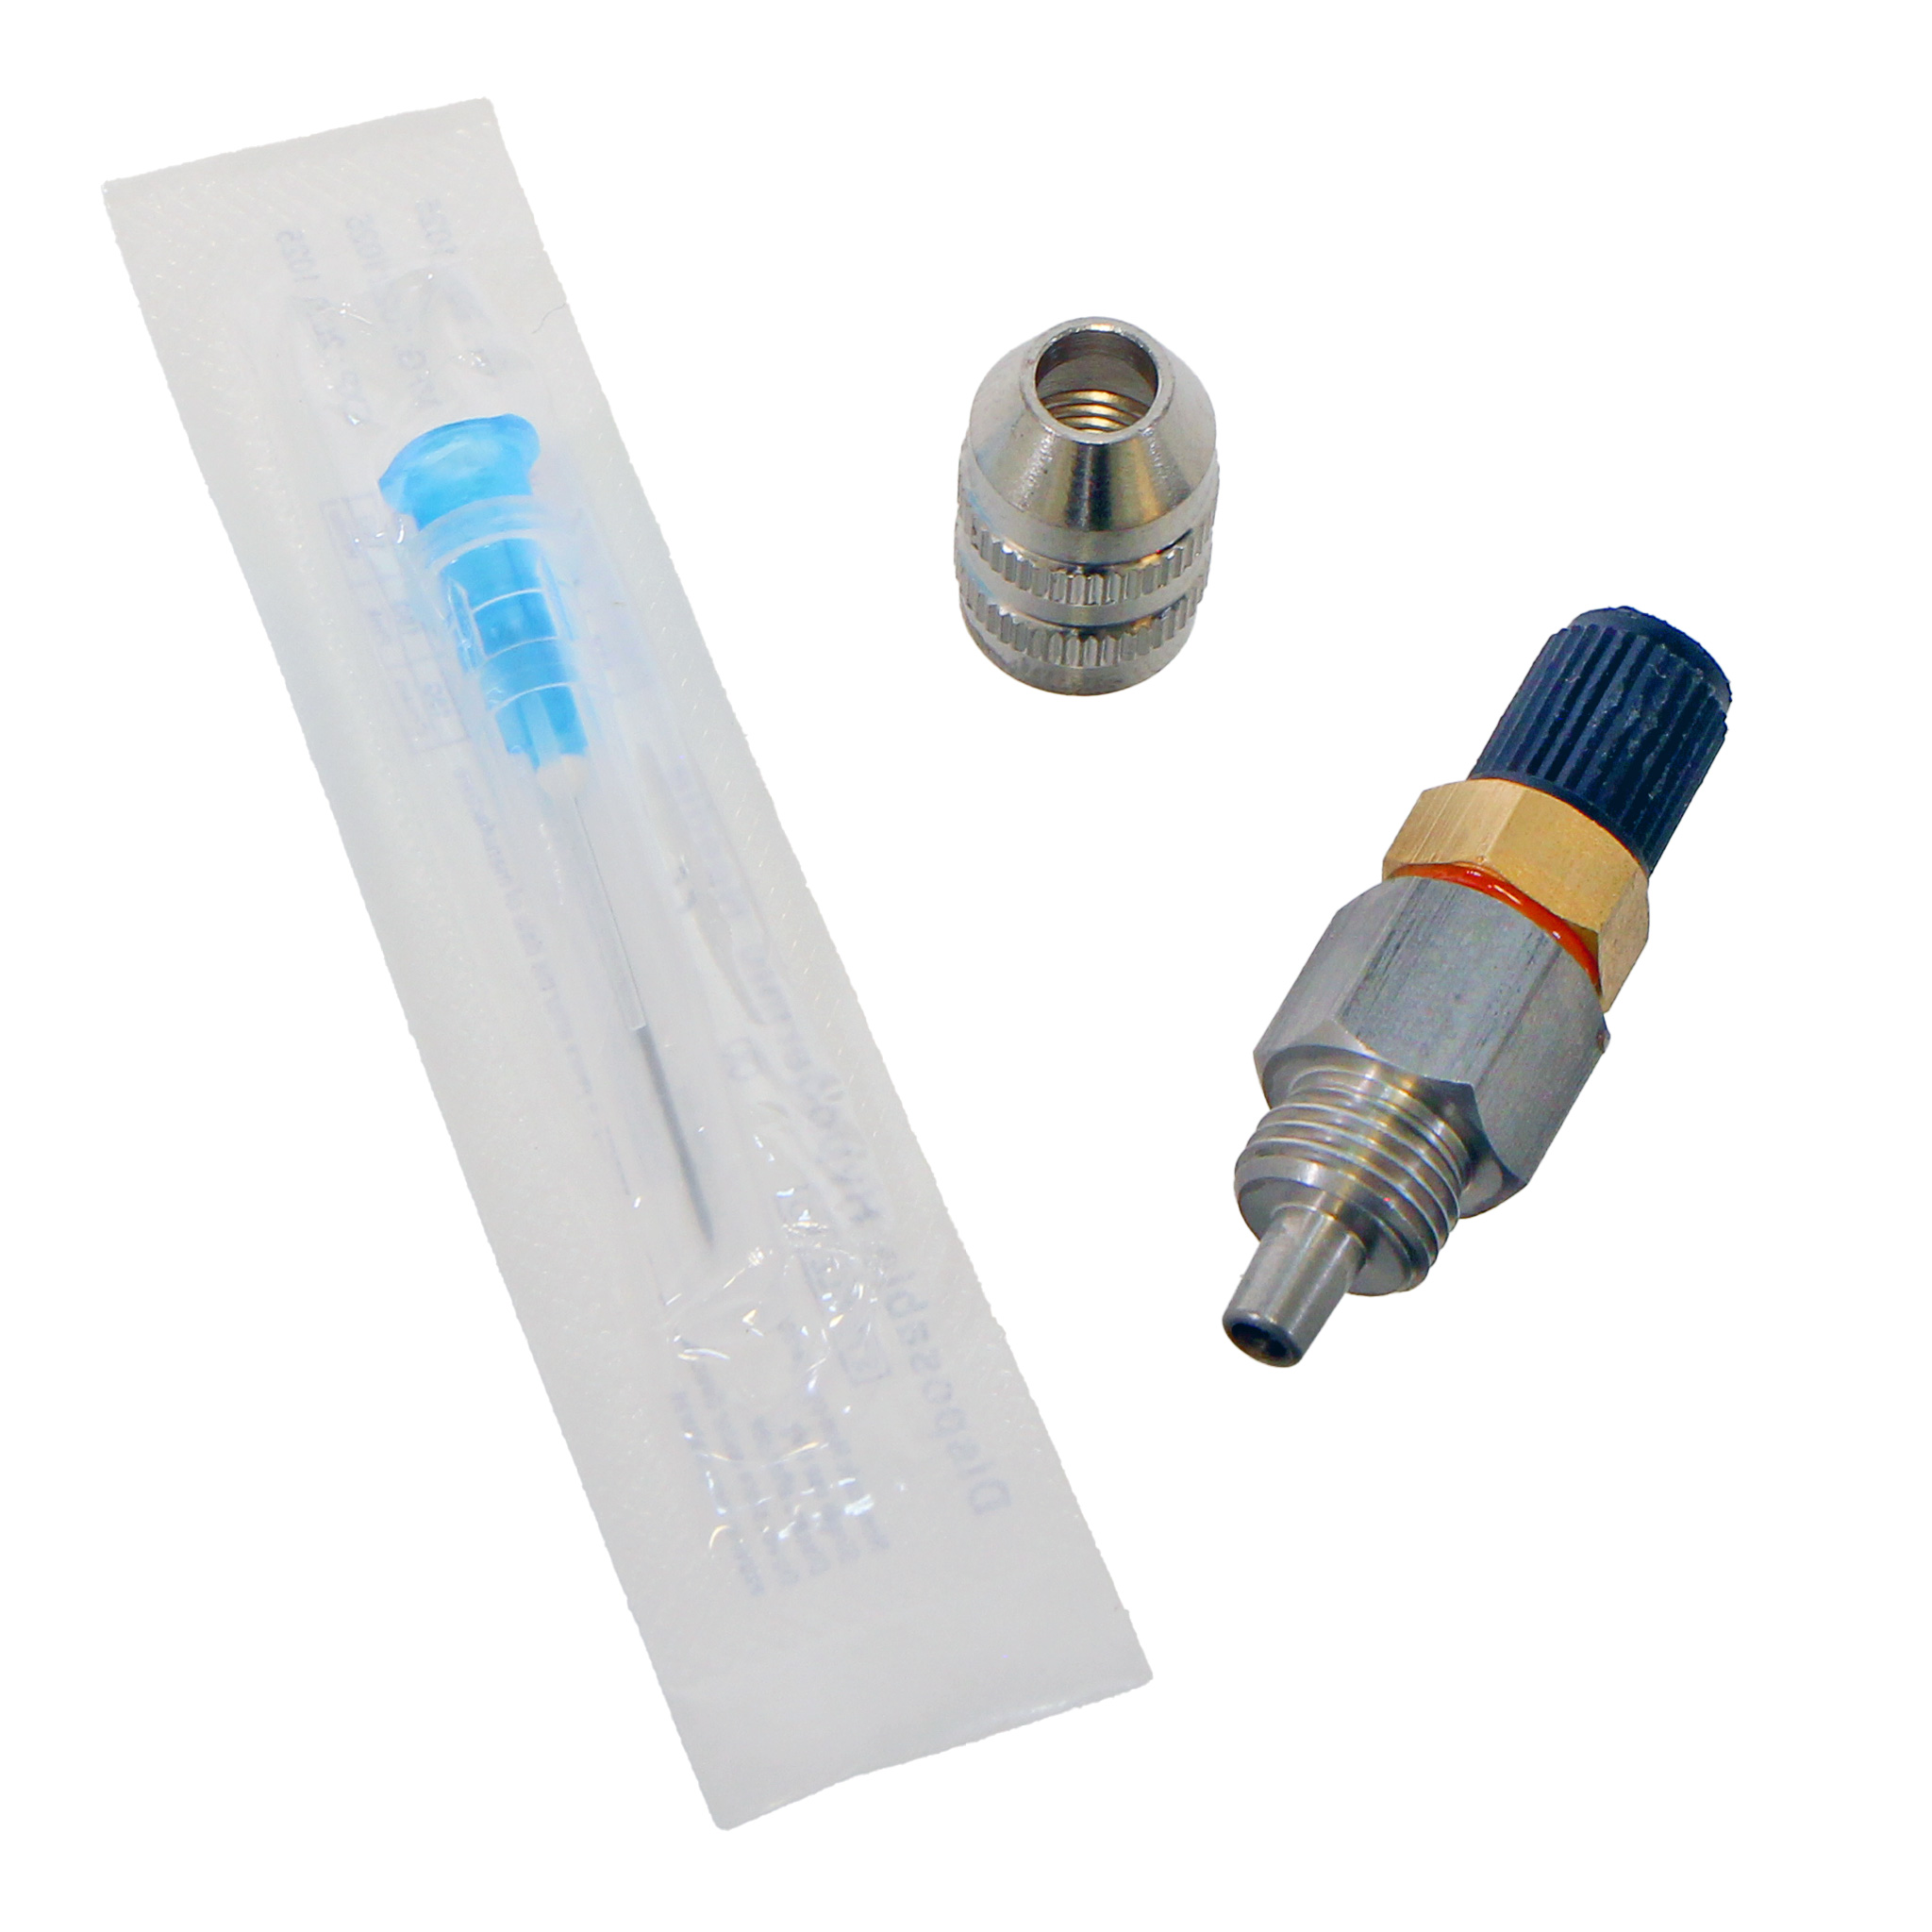 Anso Suspension IFP Needle Charging Tool, Schrader Valve Fit